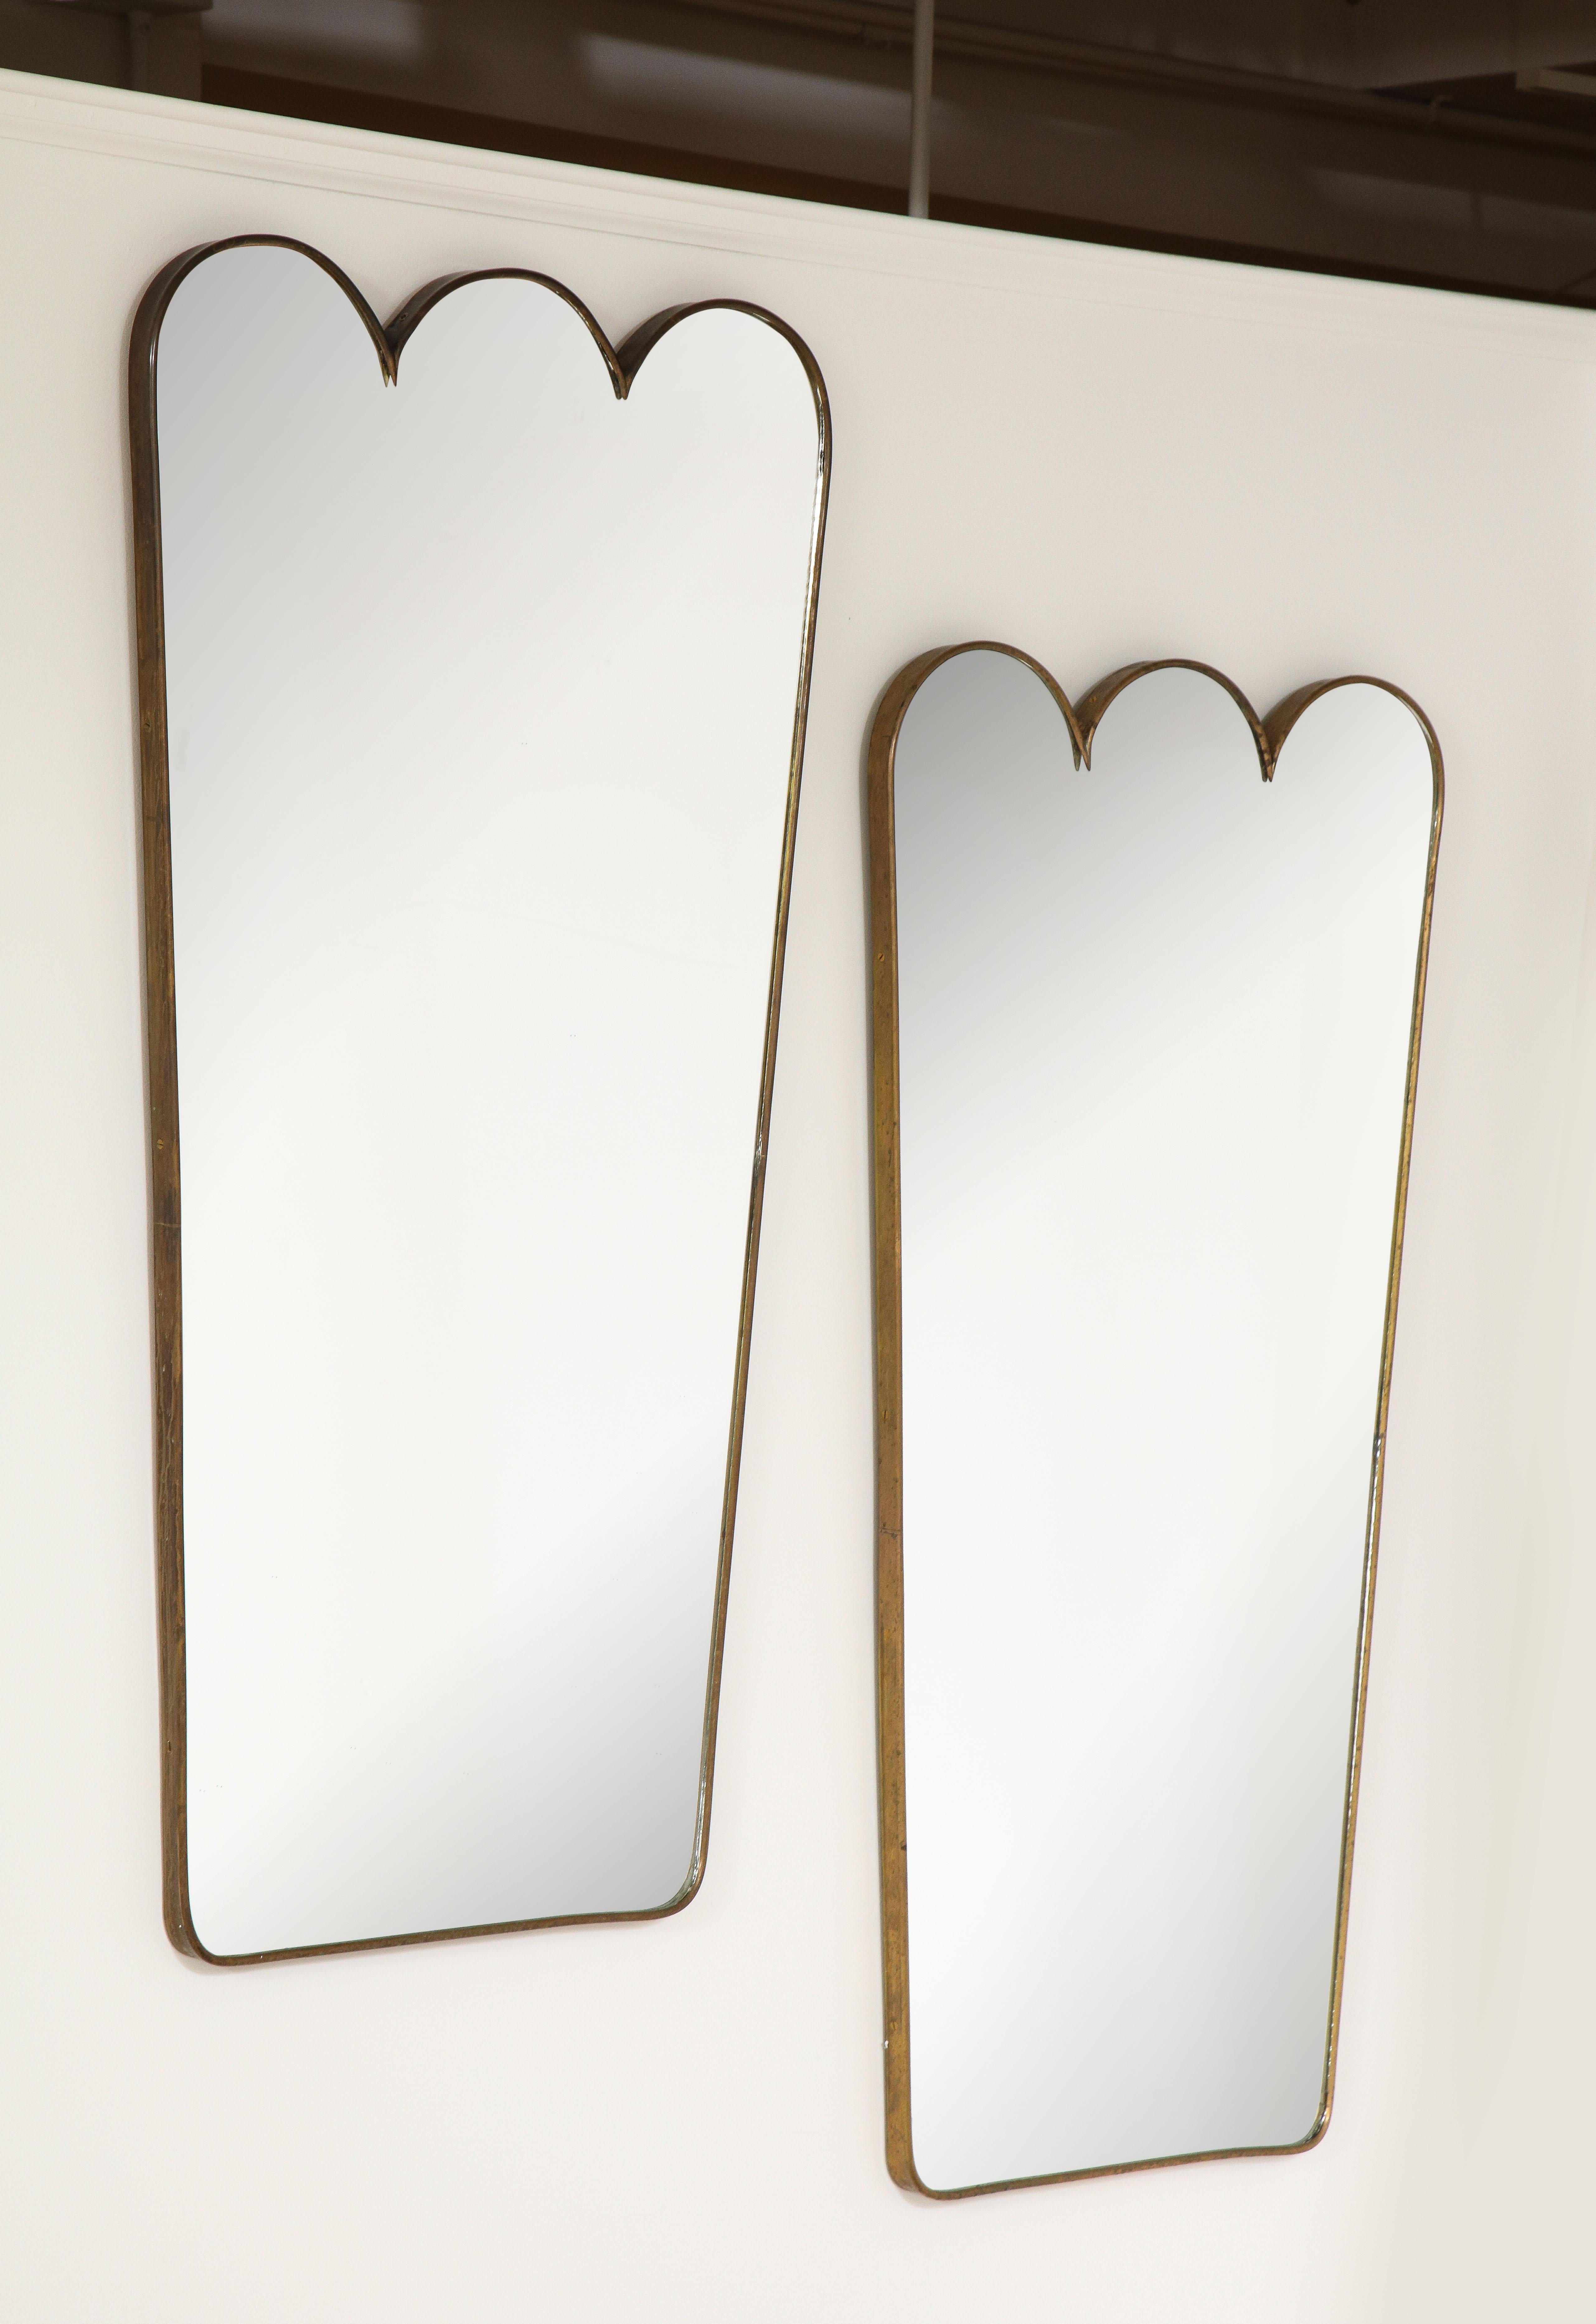 An elegant pair of Italian 1950's brass modernist mirrors with a scalloped shaped designed crest. Made with excellent craftsmanship and solid construction, with solid wood backing. This pair of mirrors offers clean modernist lines and of organic